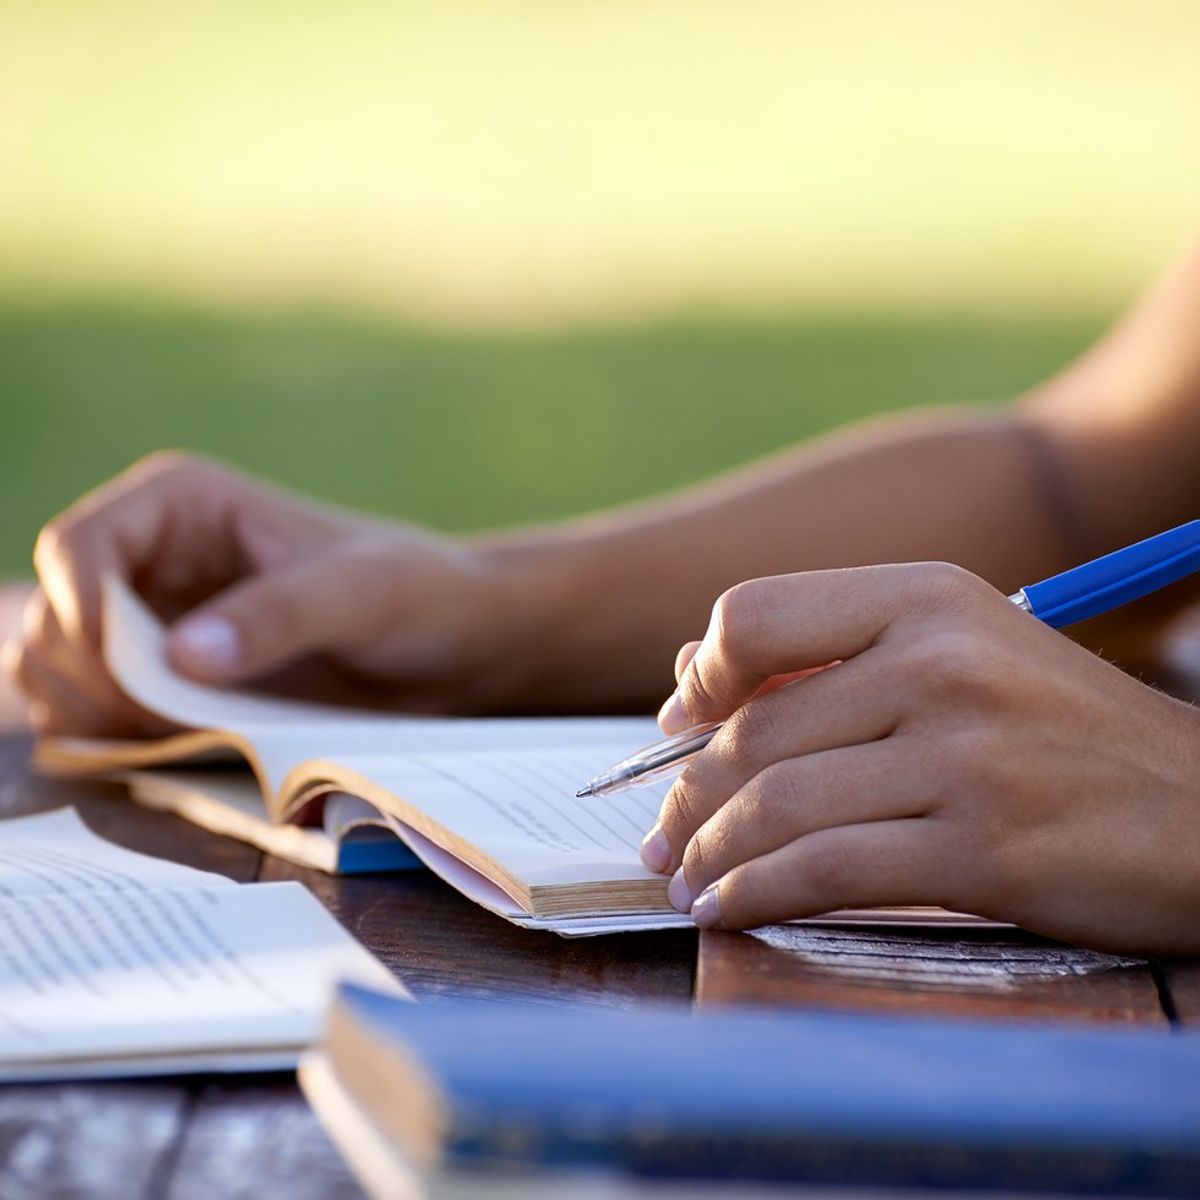 5 Ways To Make The Most of Your School Year